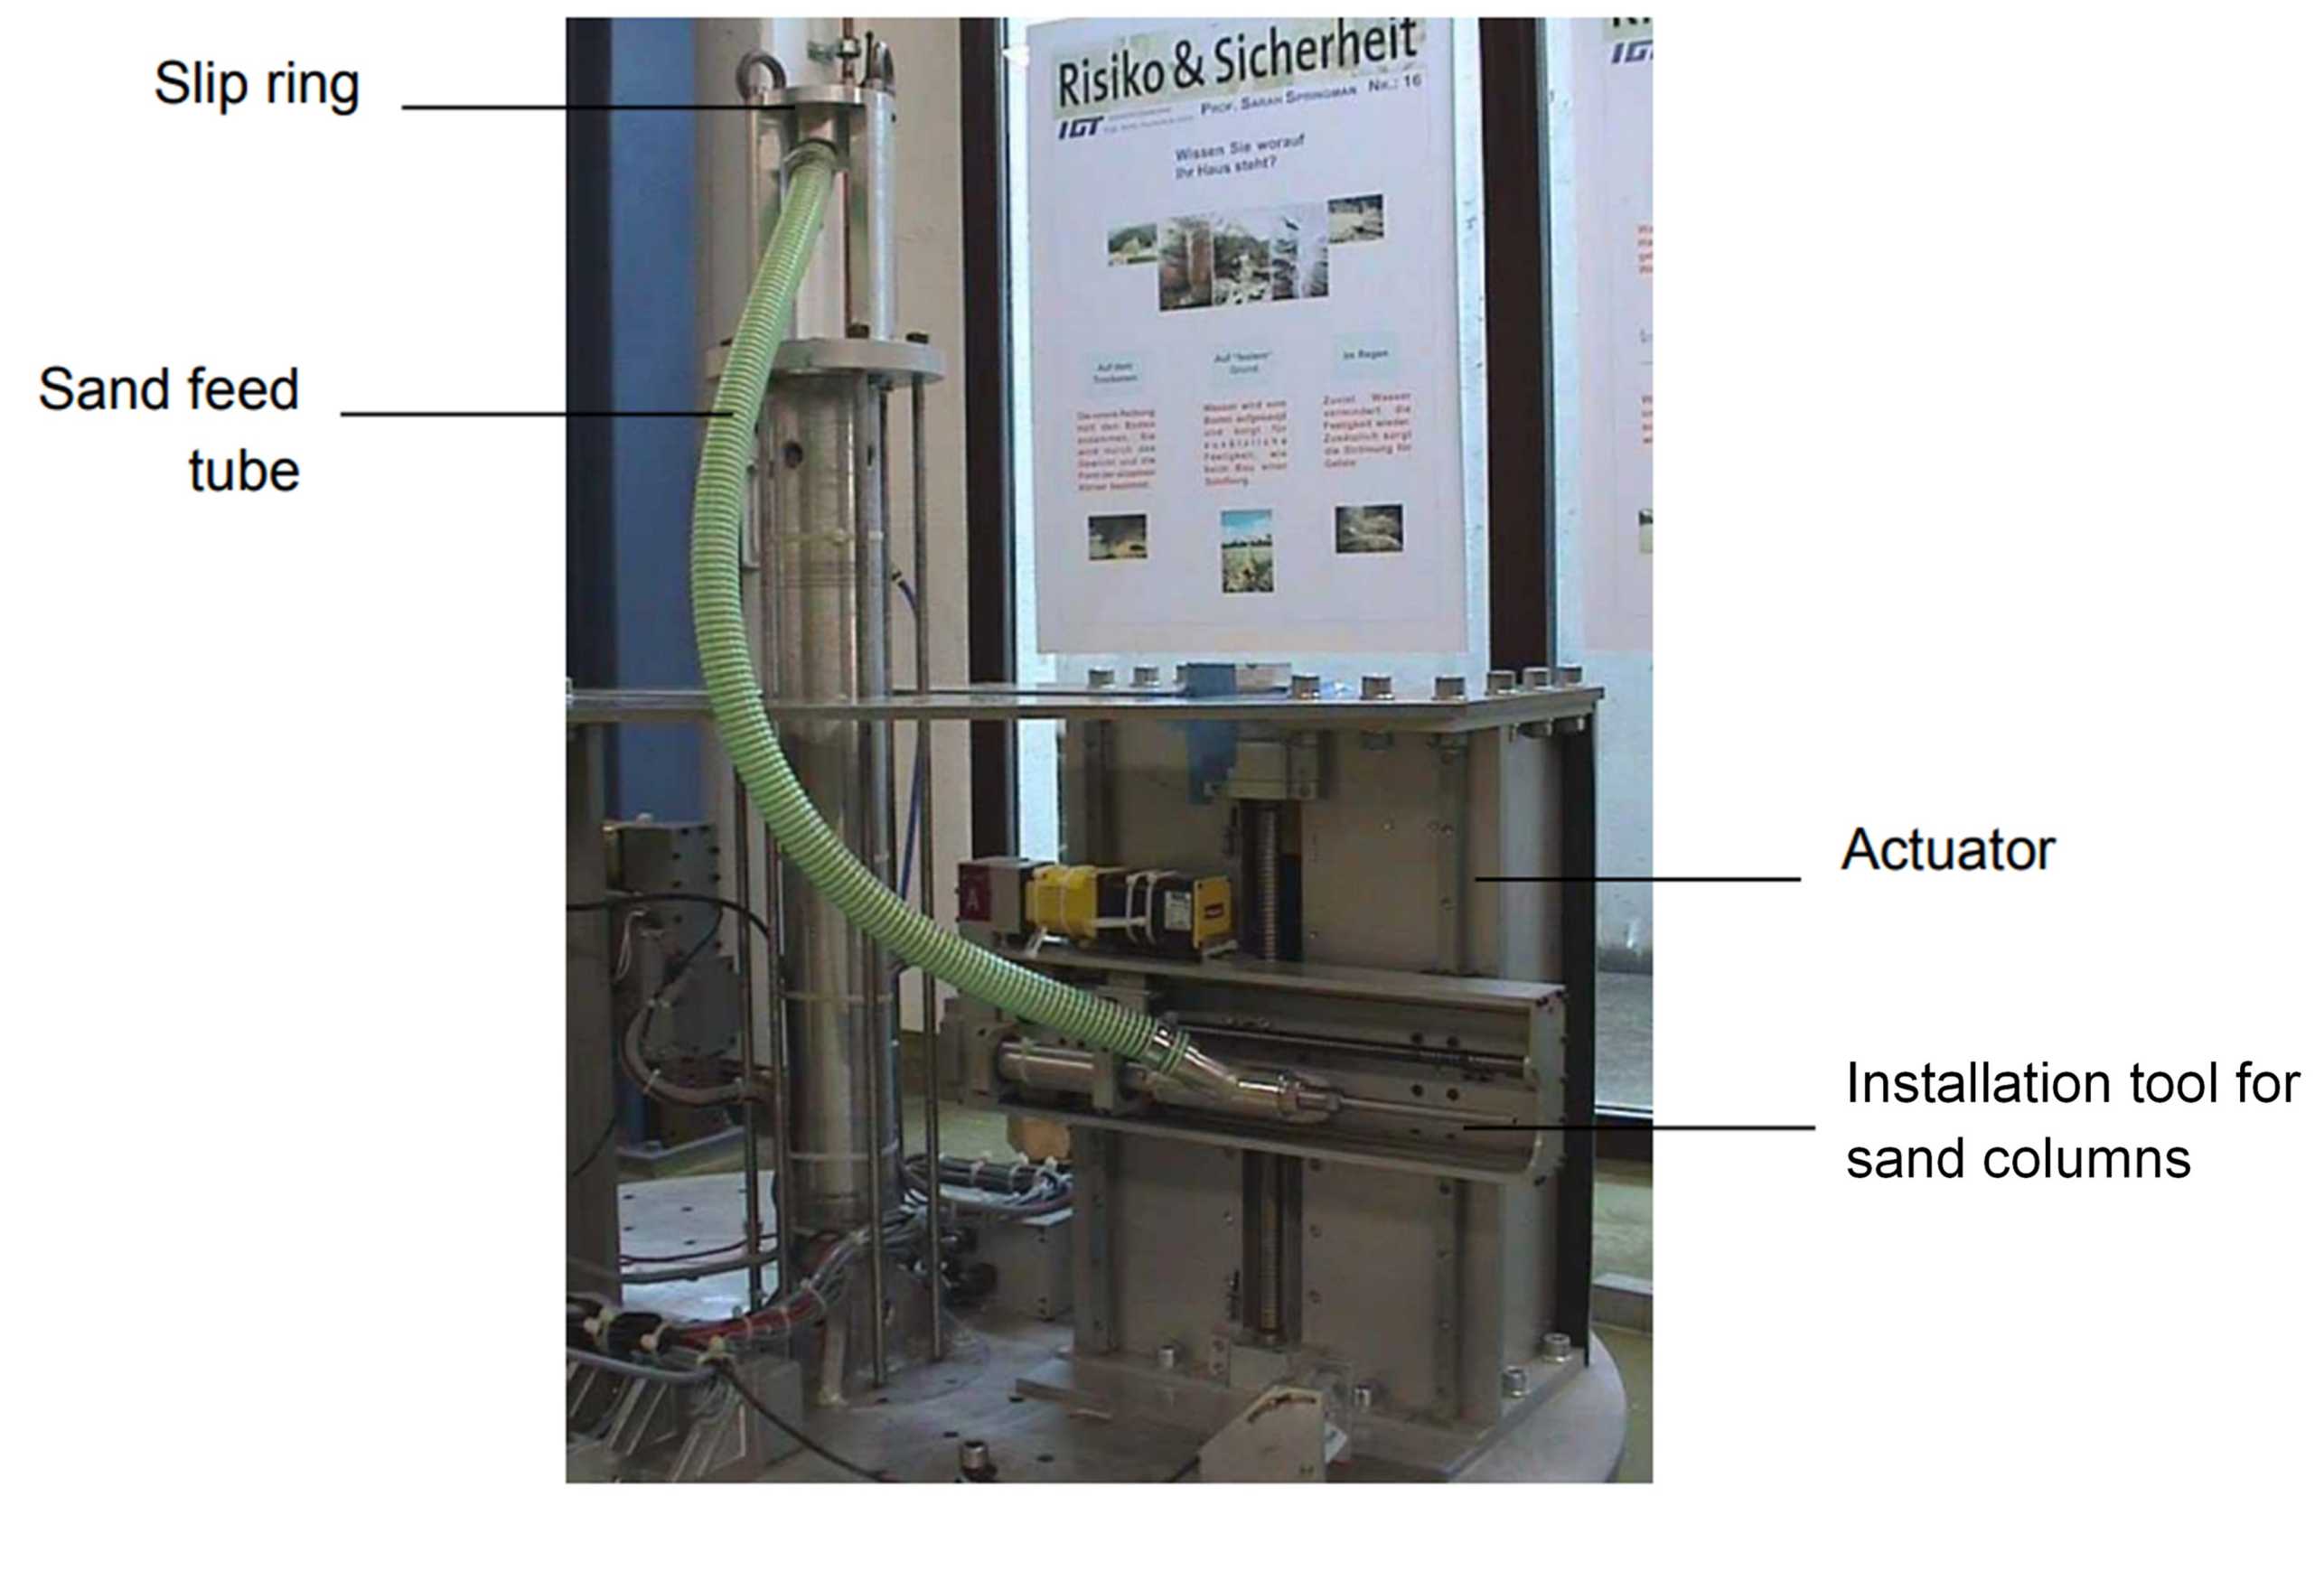 Miniature sand-column installation tool mounted on the actuator and connected to the slip ring (Pooley, 2013).